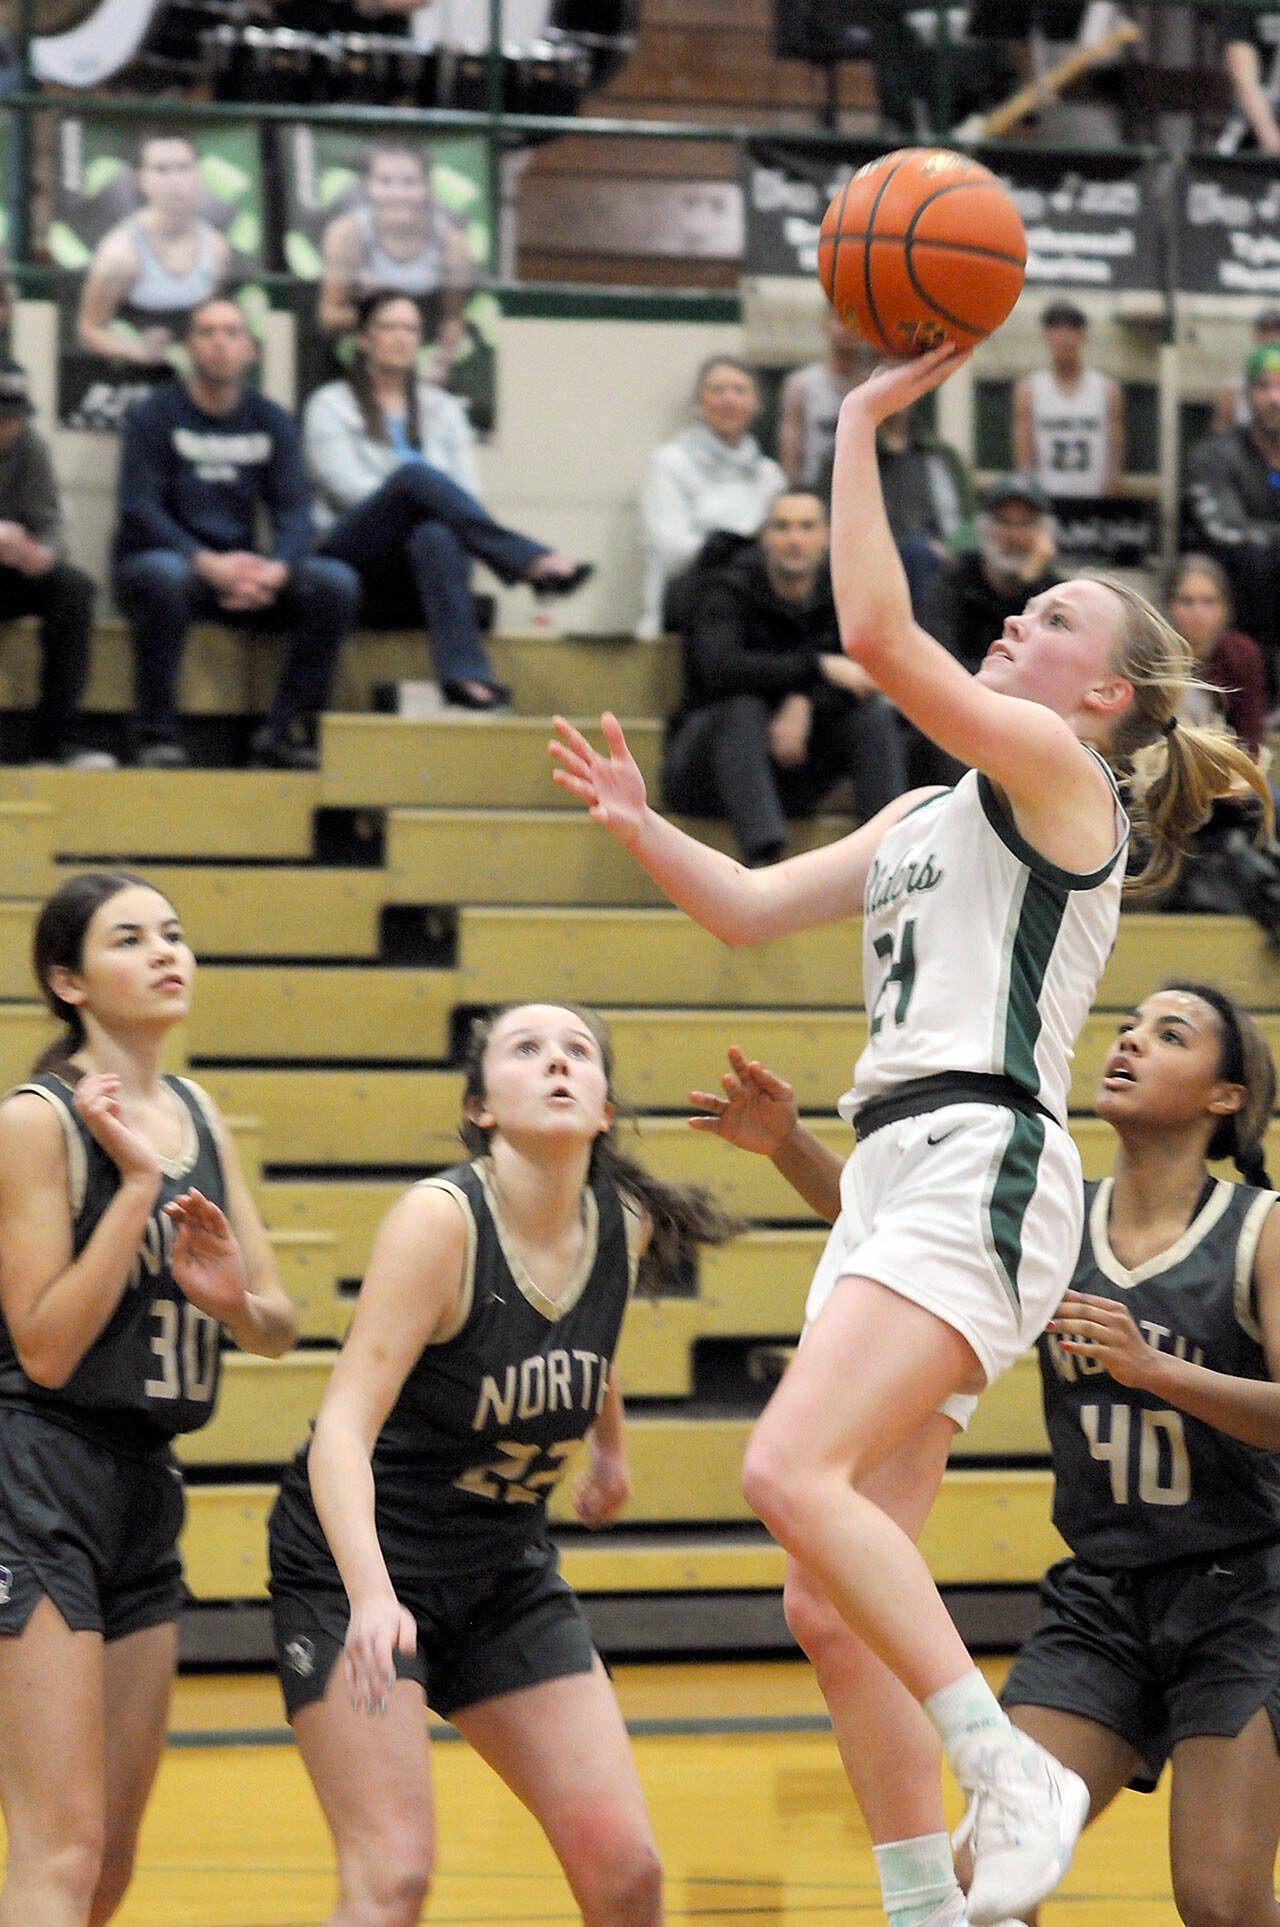 Port Angeles’ Anna Petty, front, goes for the quick layup as North Kitsap defenders, from left, Megan Komar, Teegan DeVries and Coriana McMillian look on during Tuesday’s game at Port Angeles High School. (Keith Thorpe/Peninsula Daily News)